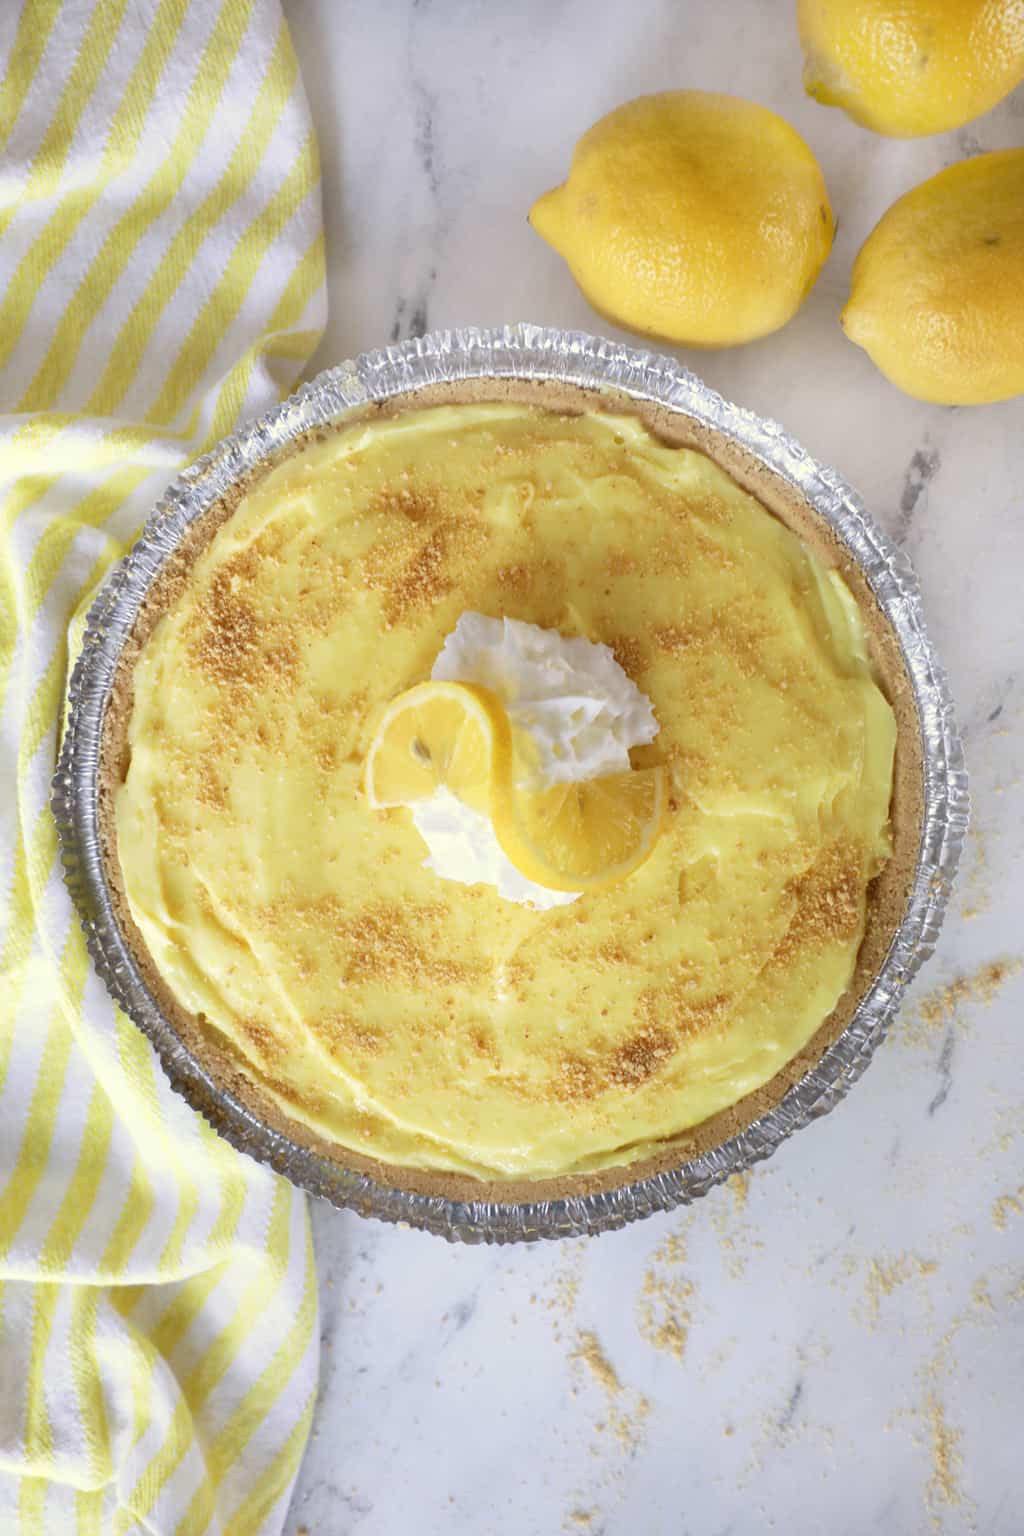 a full lemon pudding pie next to a towel, some lemons and crumbs